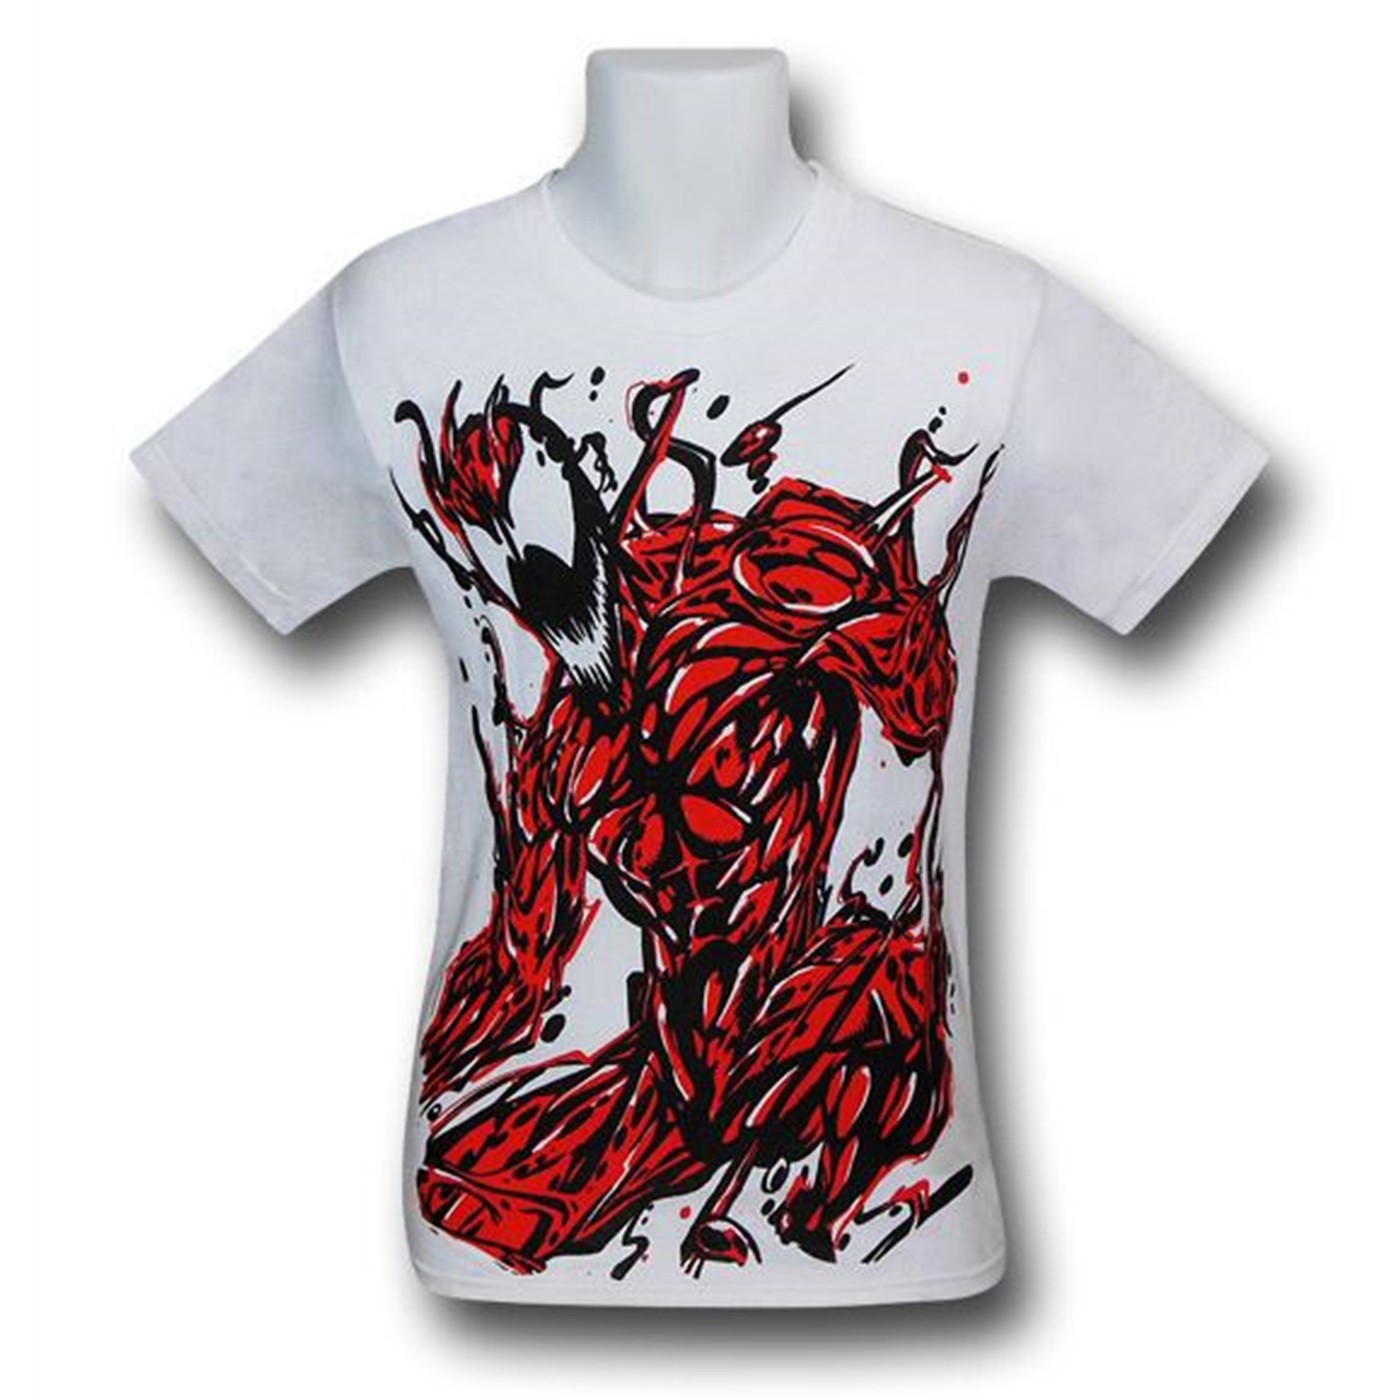 Carnage Angry Image on White T-Shirt